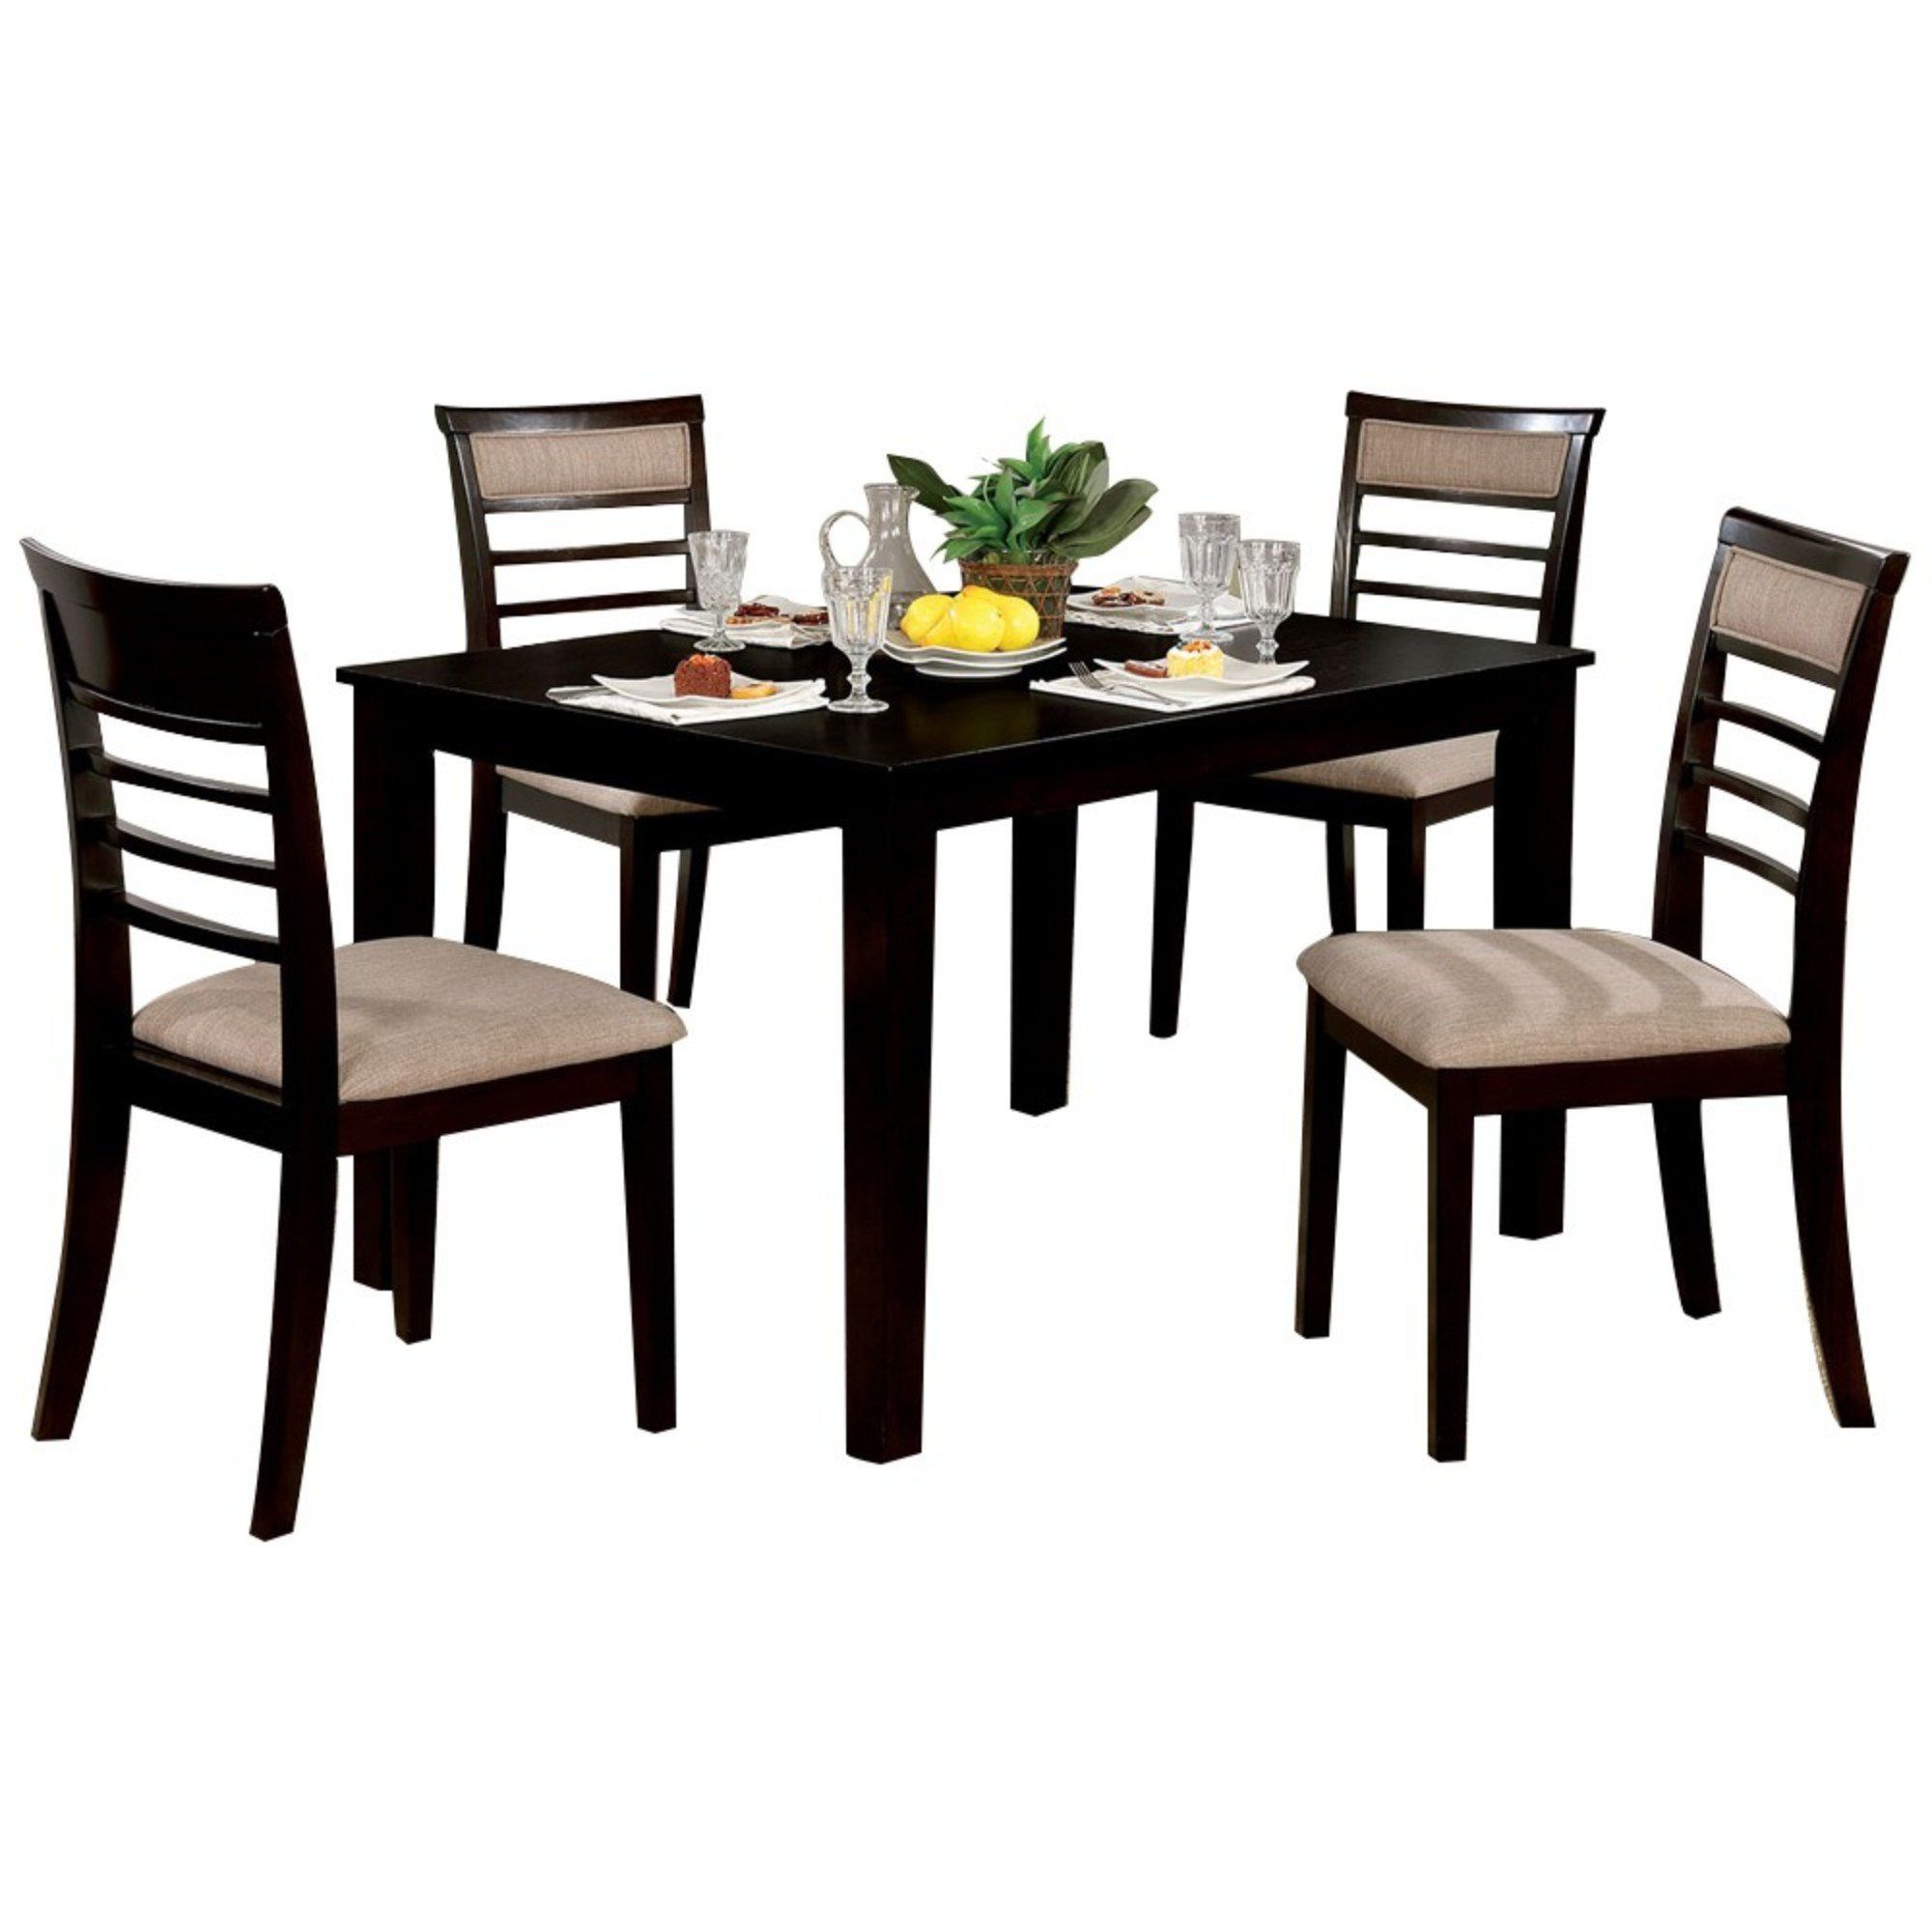 Featured Photo of Hanska Wooden 5 Piece Counter Height Dining Table Sets (Set Of 5)